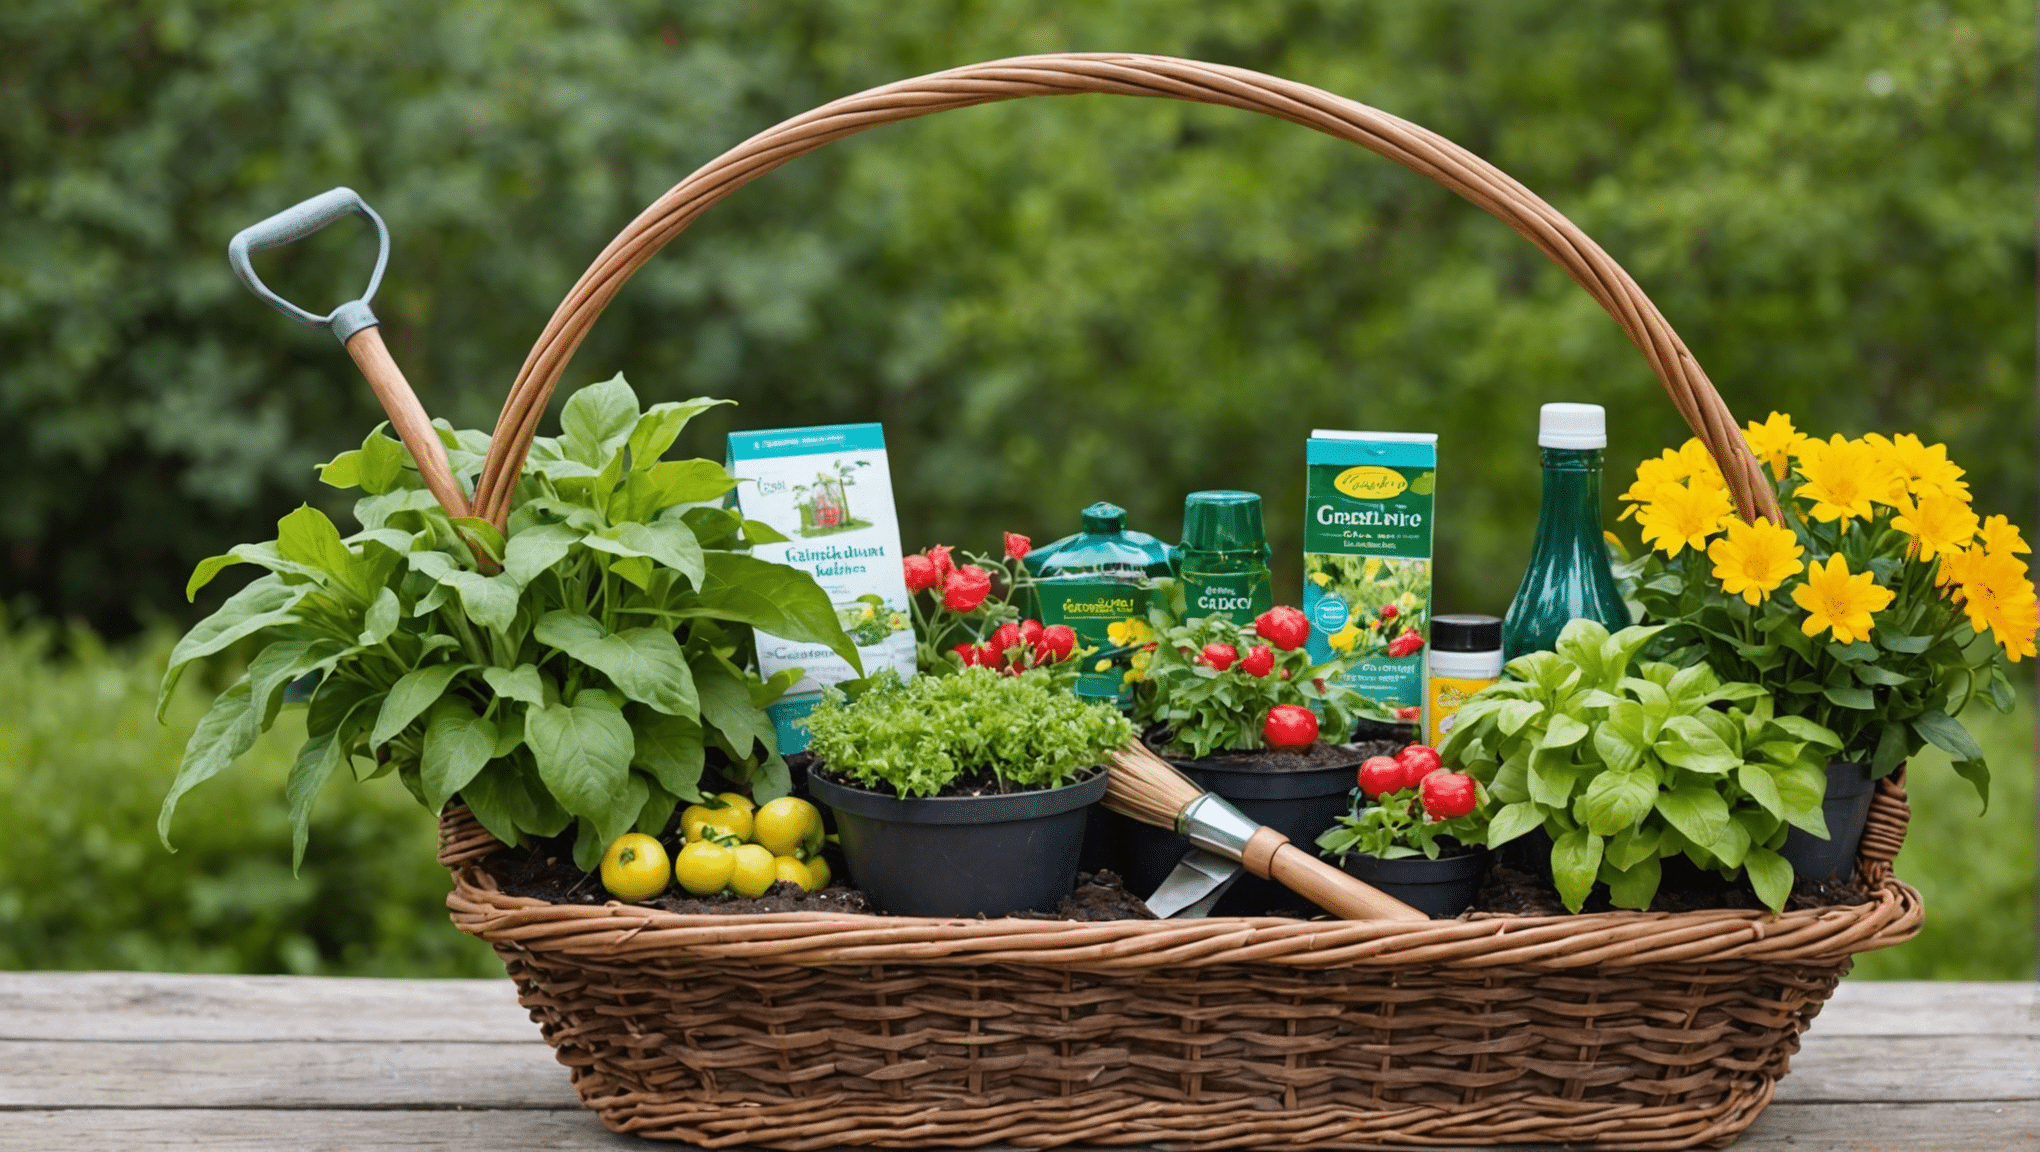 find unique gardening gift basket ideas to delight your favorite green thumb. discover a variety of creative and practical gifts for gardeners of all levels.